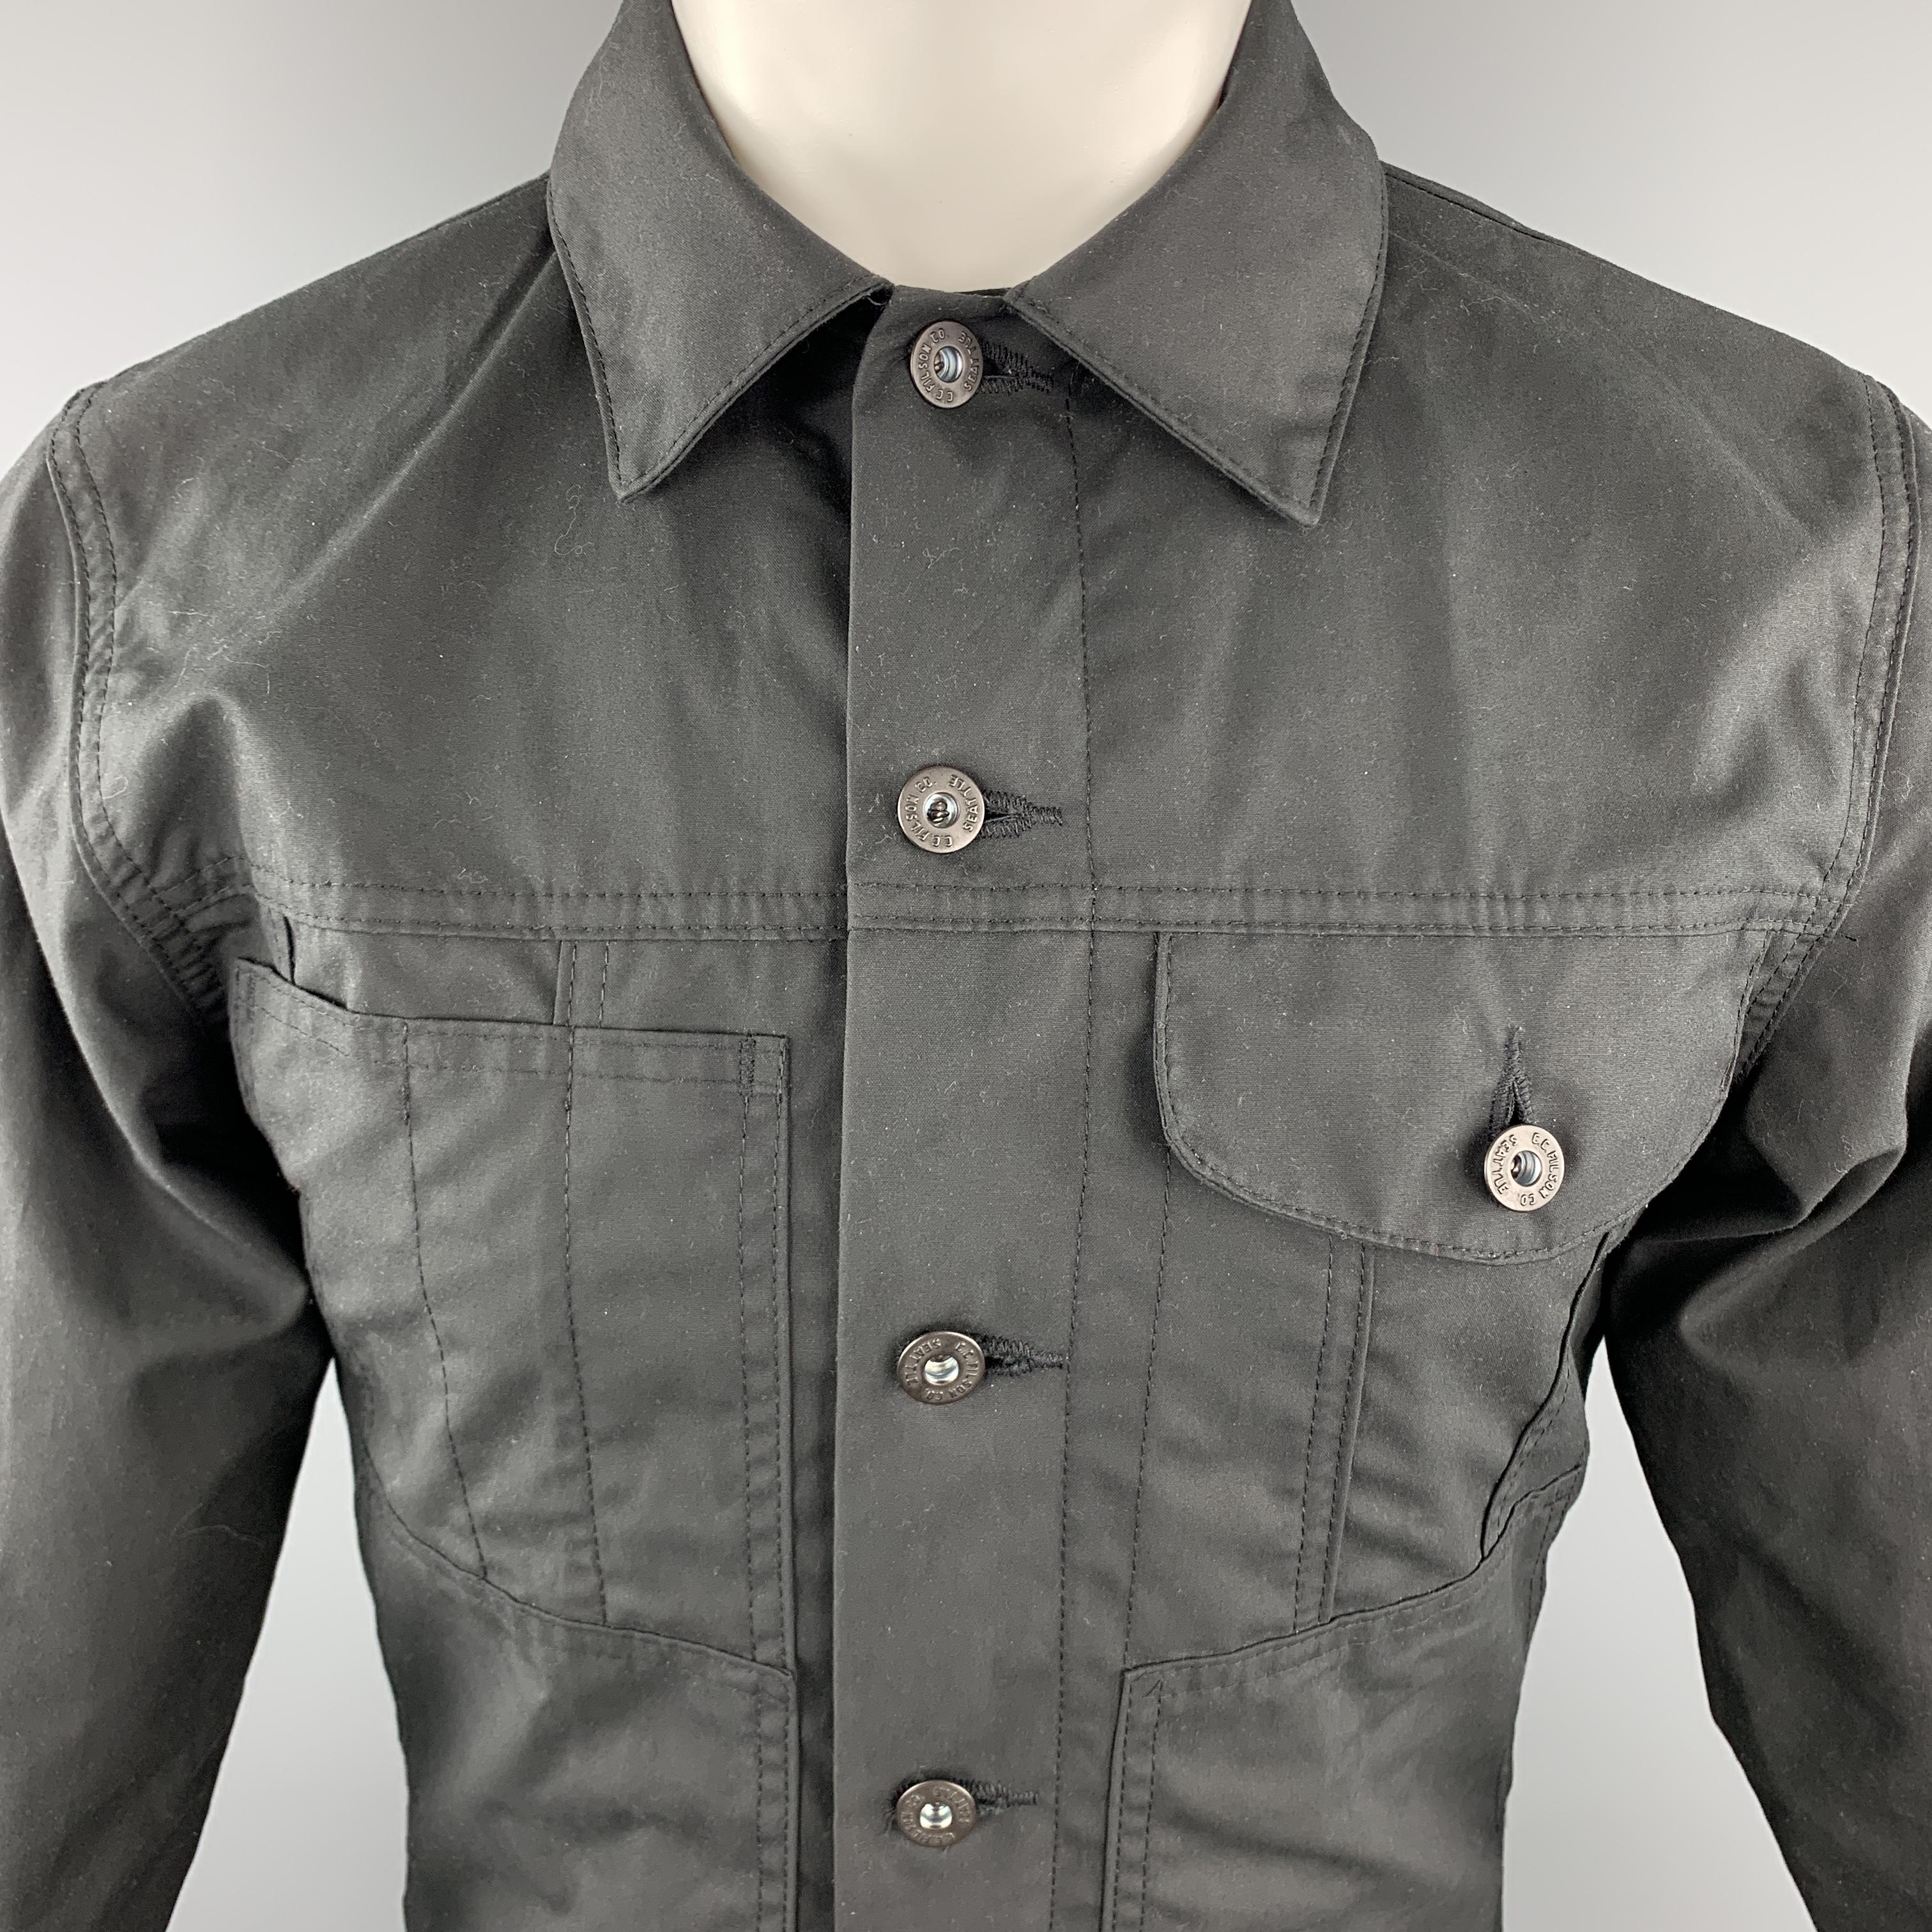 FILSON Trucker Jacket comes in a black tone in a solid coated cotton material, with patch pockets, buttoned cuffs, lined, button up. Made in USA. 

Excellent Pre-Owned Condition.
Marked: XS

Measurements:

Shoulder: 16.5 in. 
Chest: 38 in. 
Sleeve: